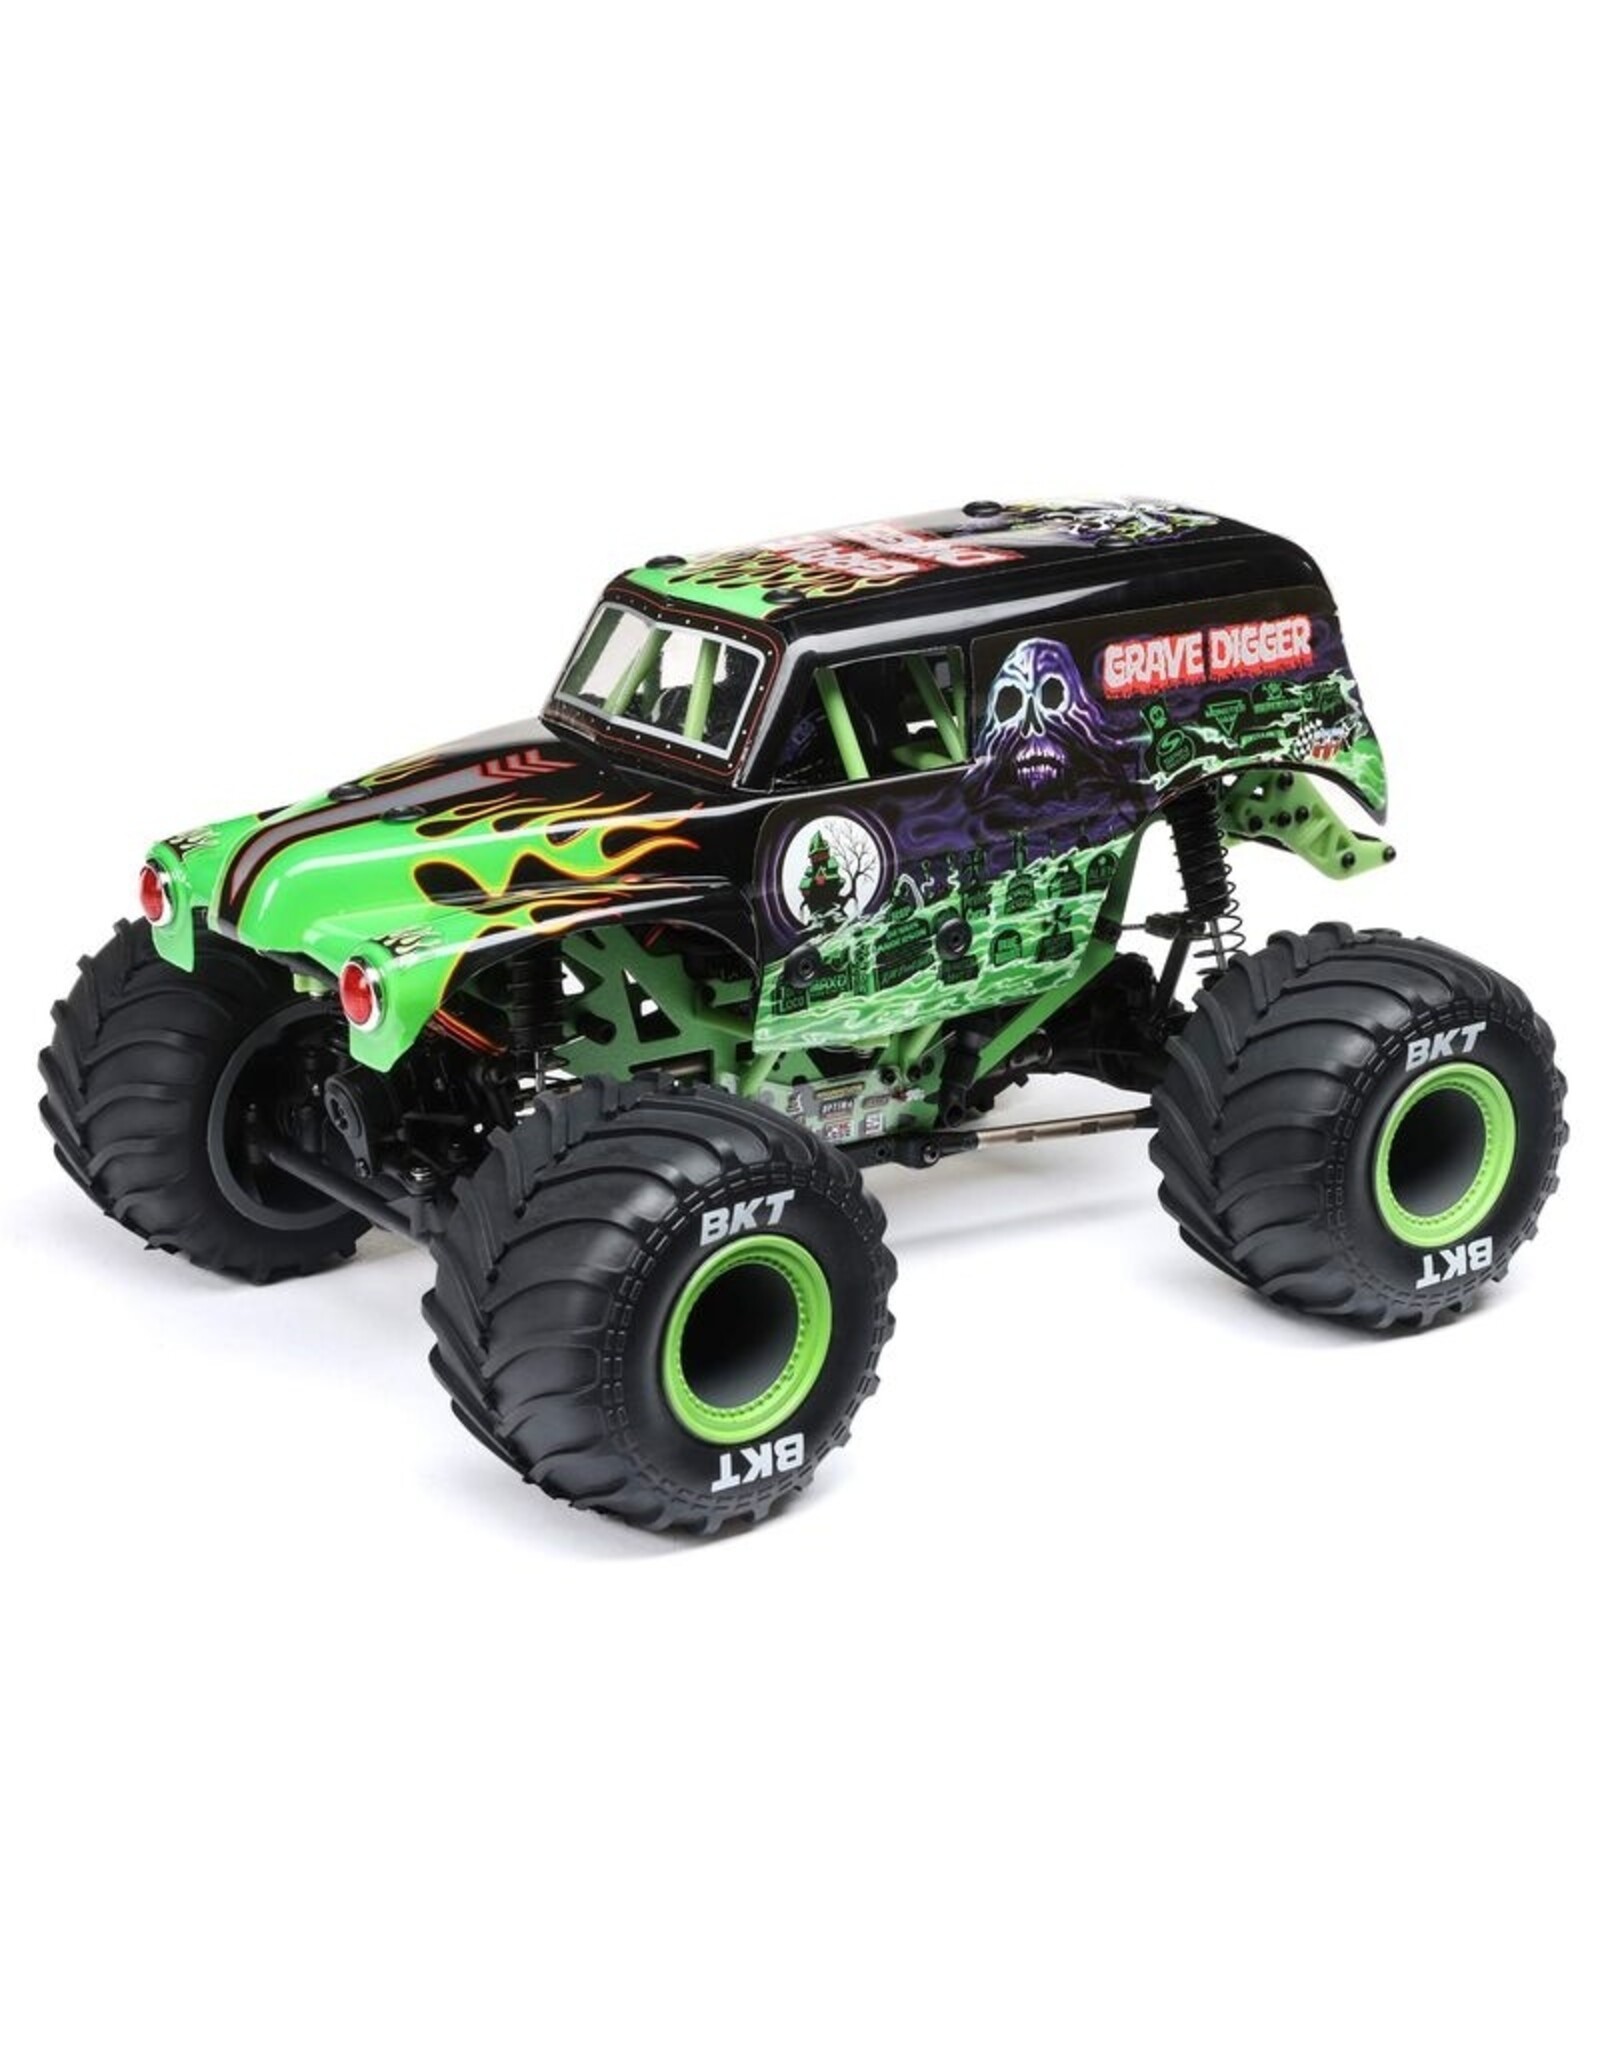 Losi LOS01026T1 1/18 Mini LMT 4WD Grave Digger Monster Truck Brushed RTR